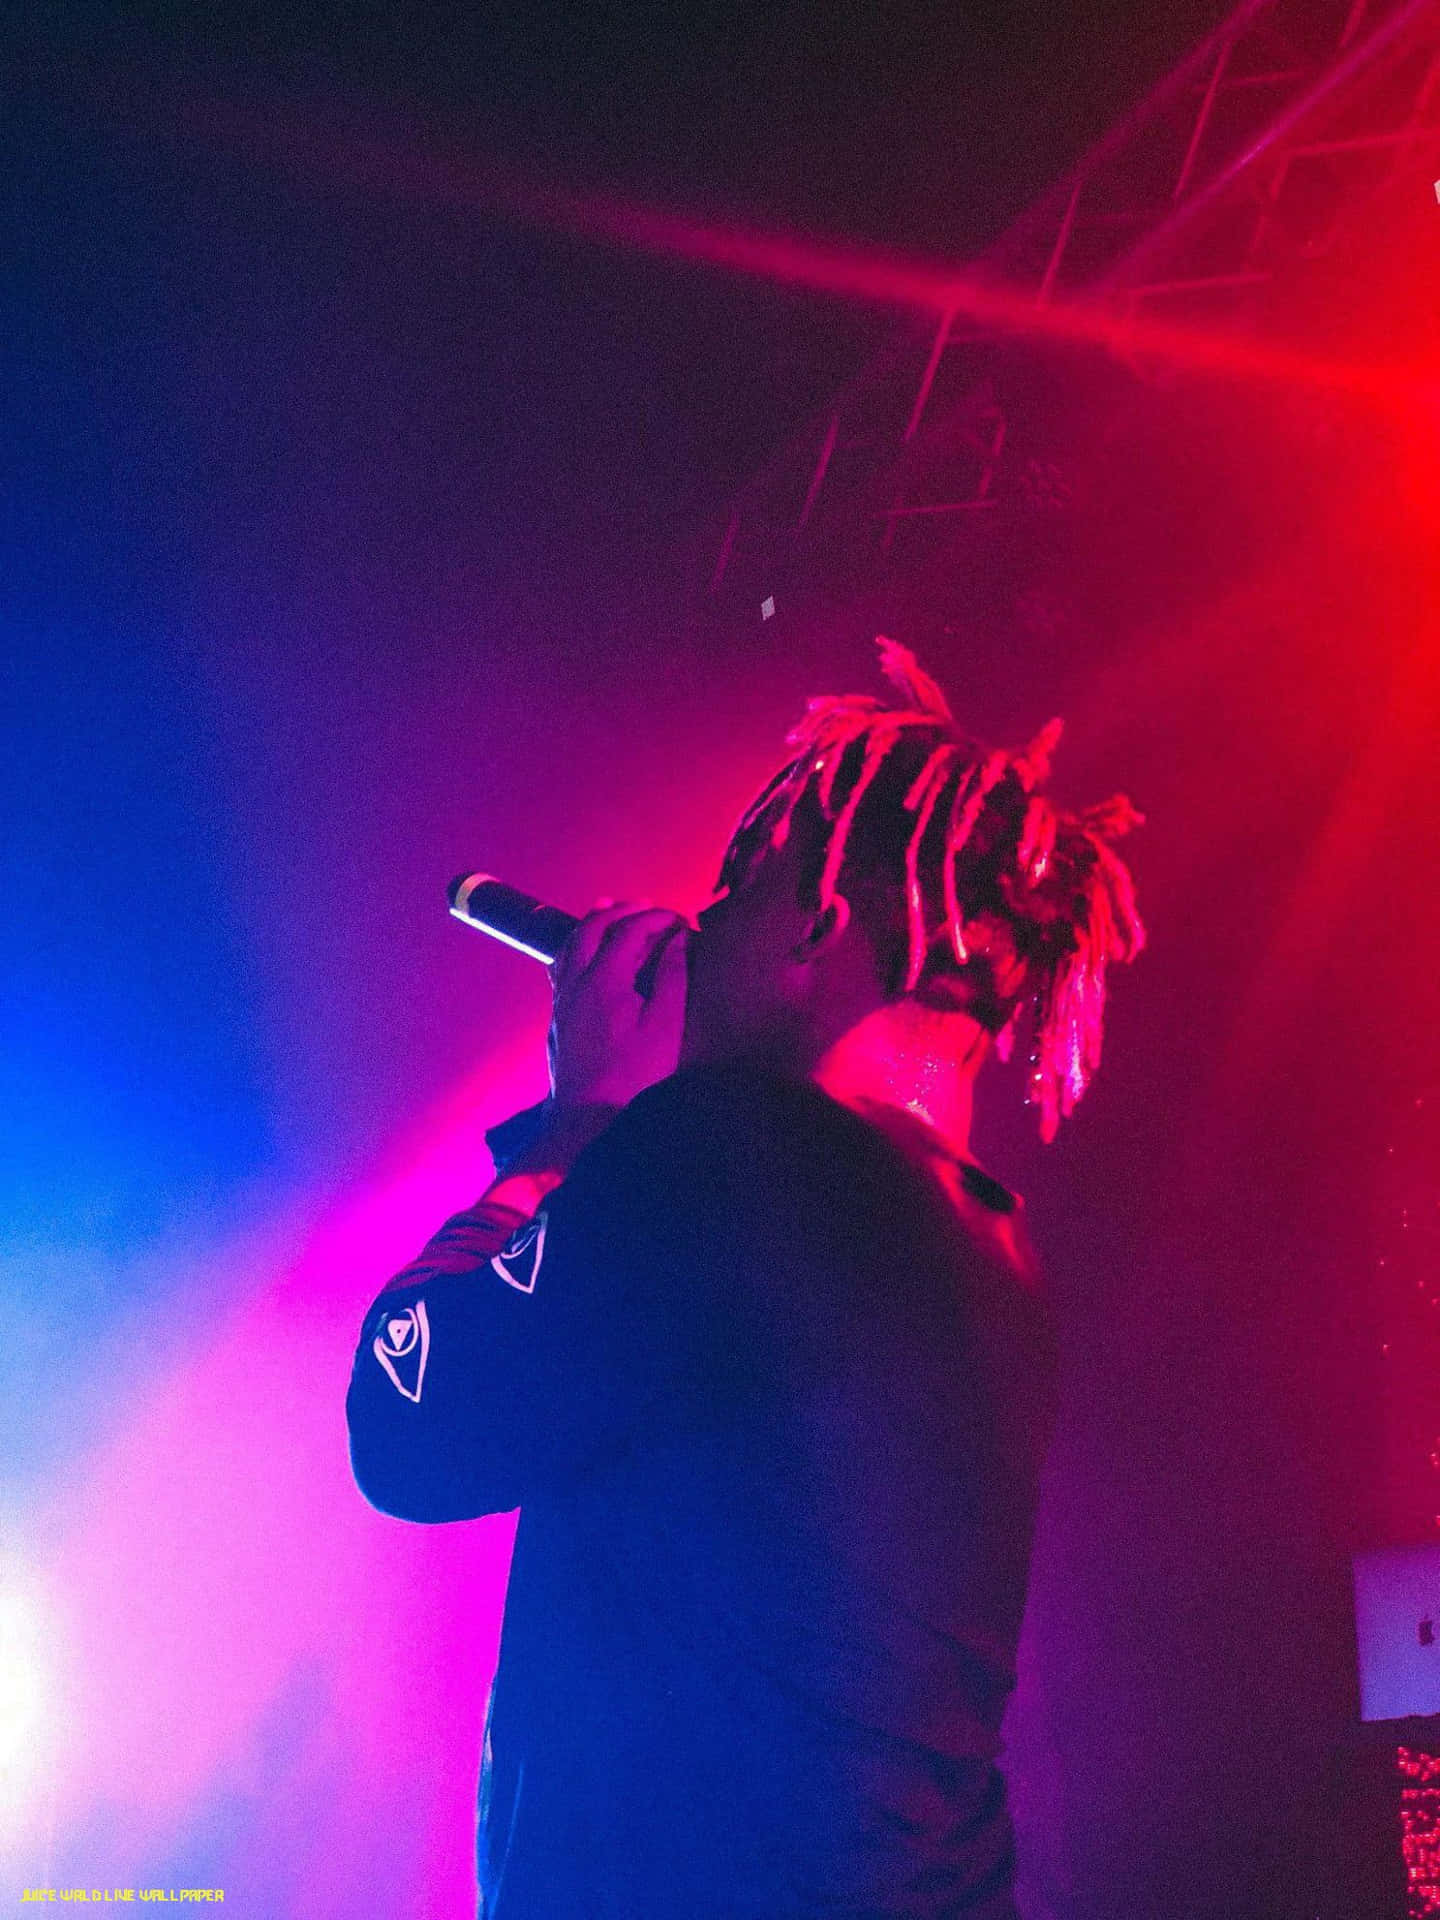 Join Us for an Incredible Live Performance by Juice Wrld Wallpaper